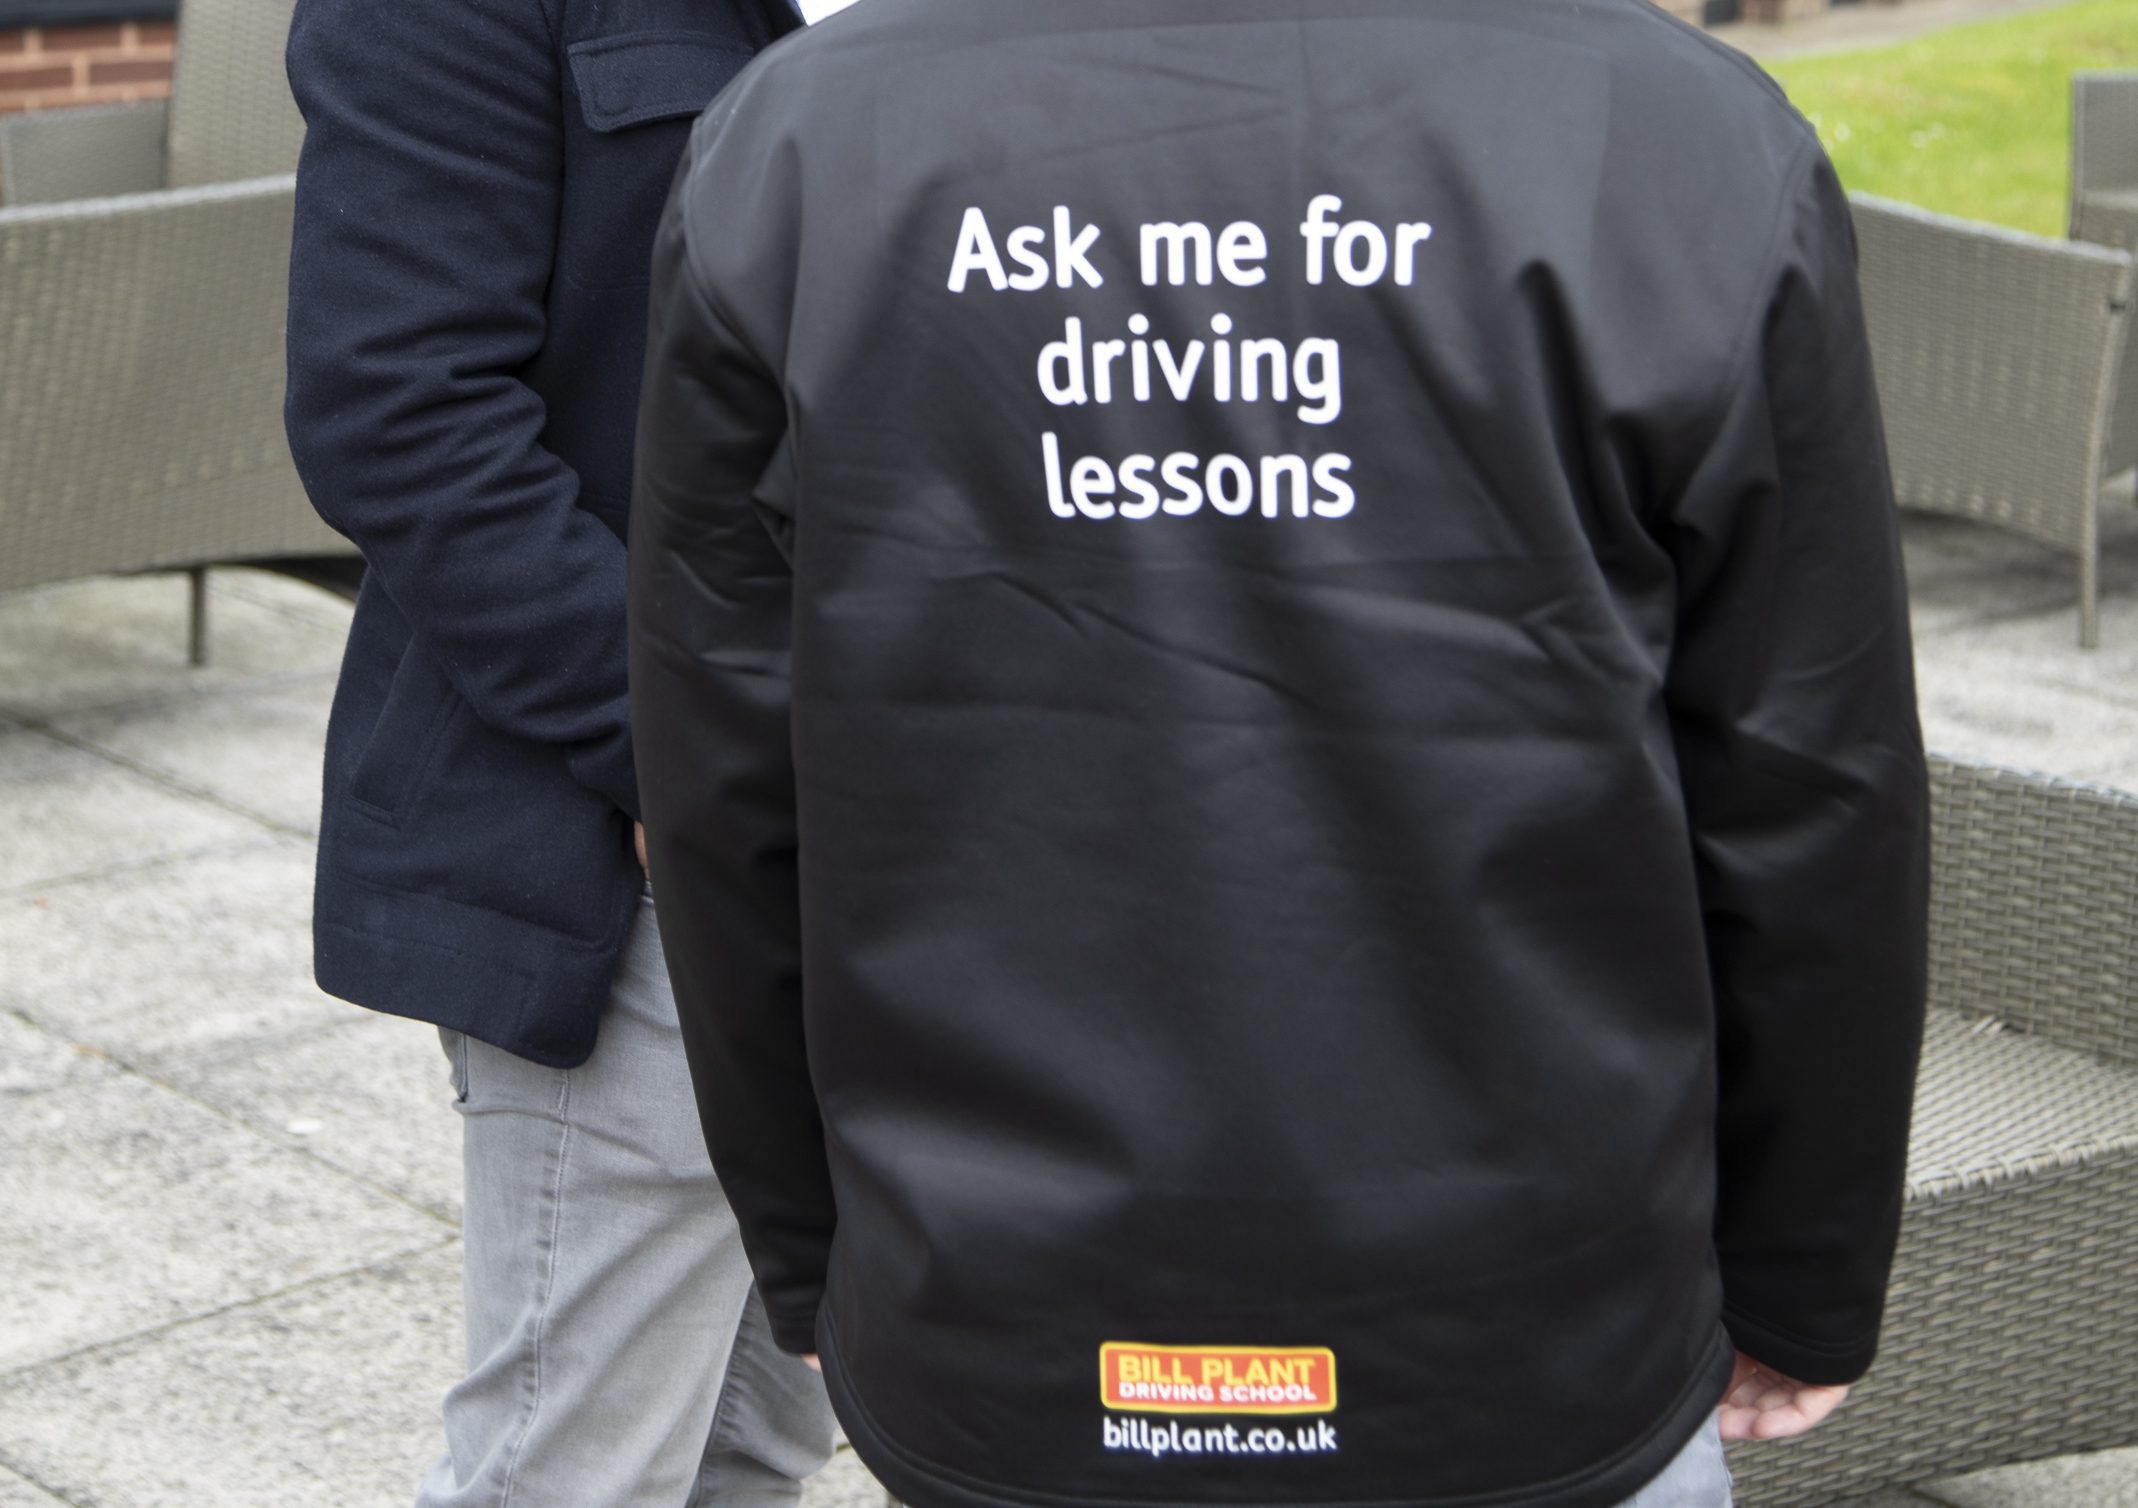 We need more Driving Instructors! The UK is expected to see a shortage